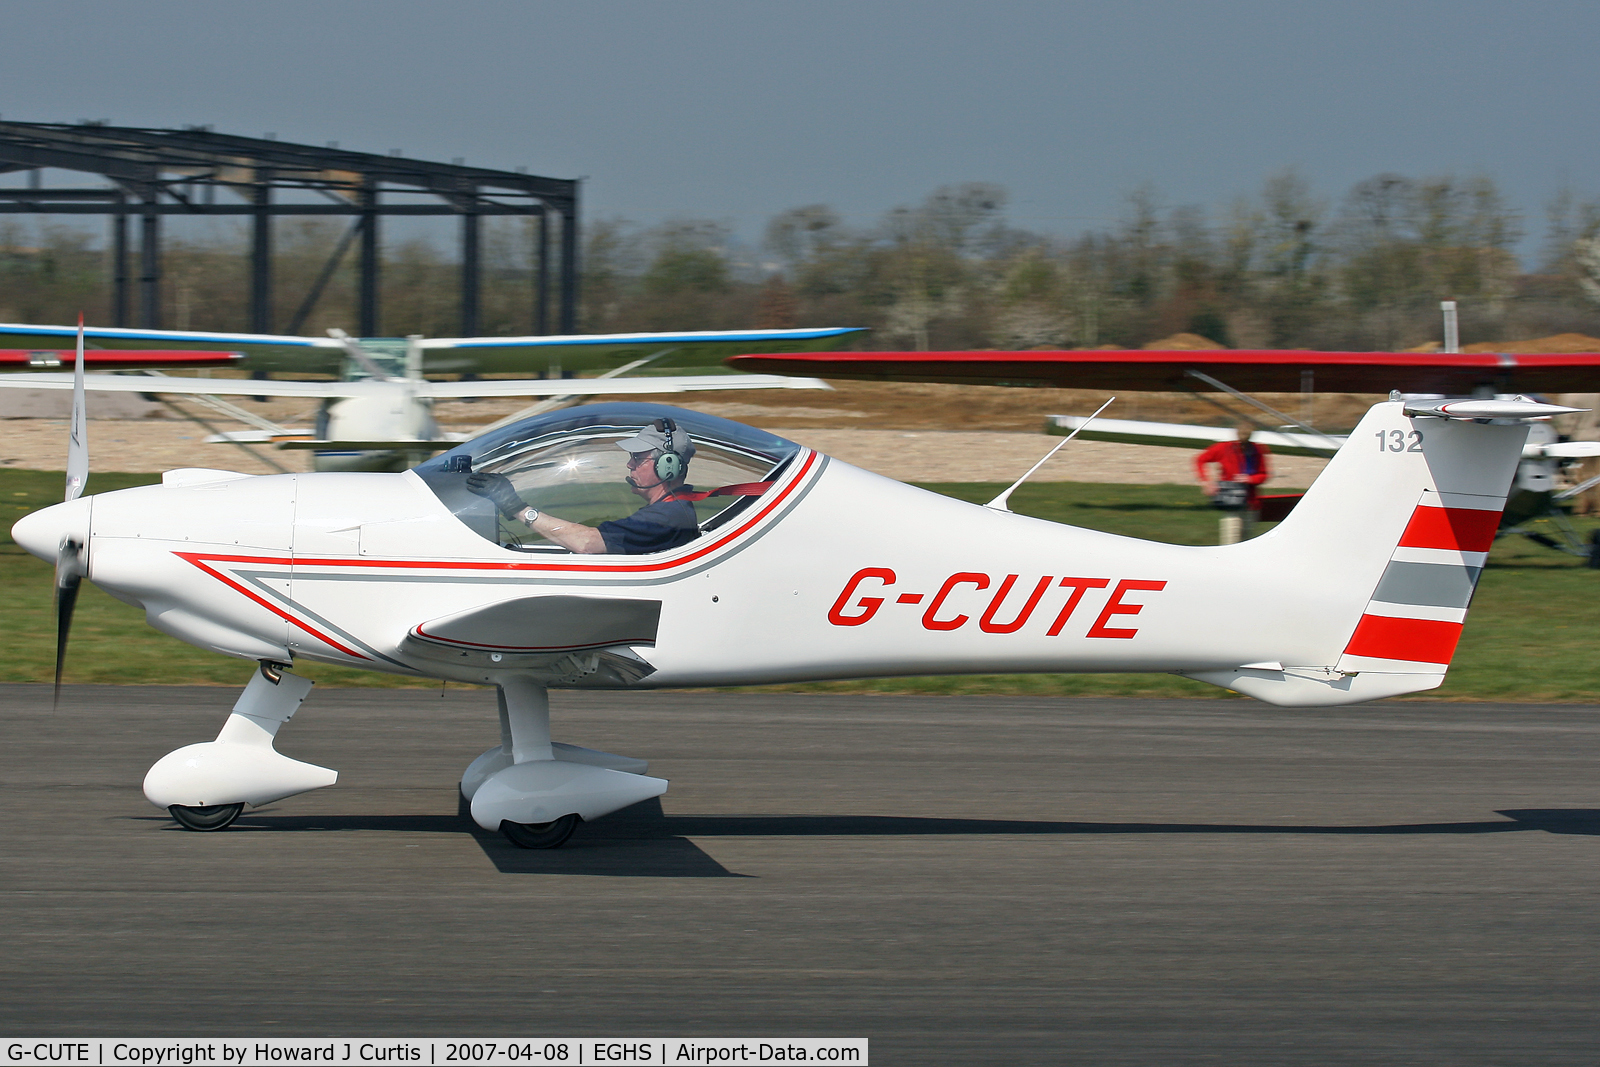 G-CUTE, 2000 Dyn'Aero MCR-01 C/N PFA 301-13511, At the PFA fly-in. Privately owned.